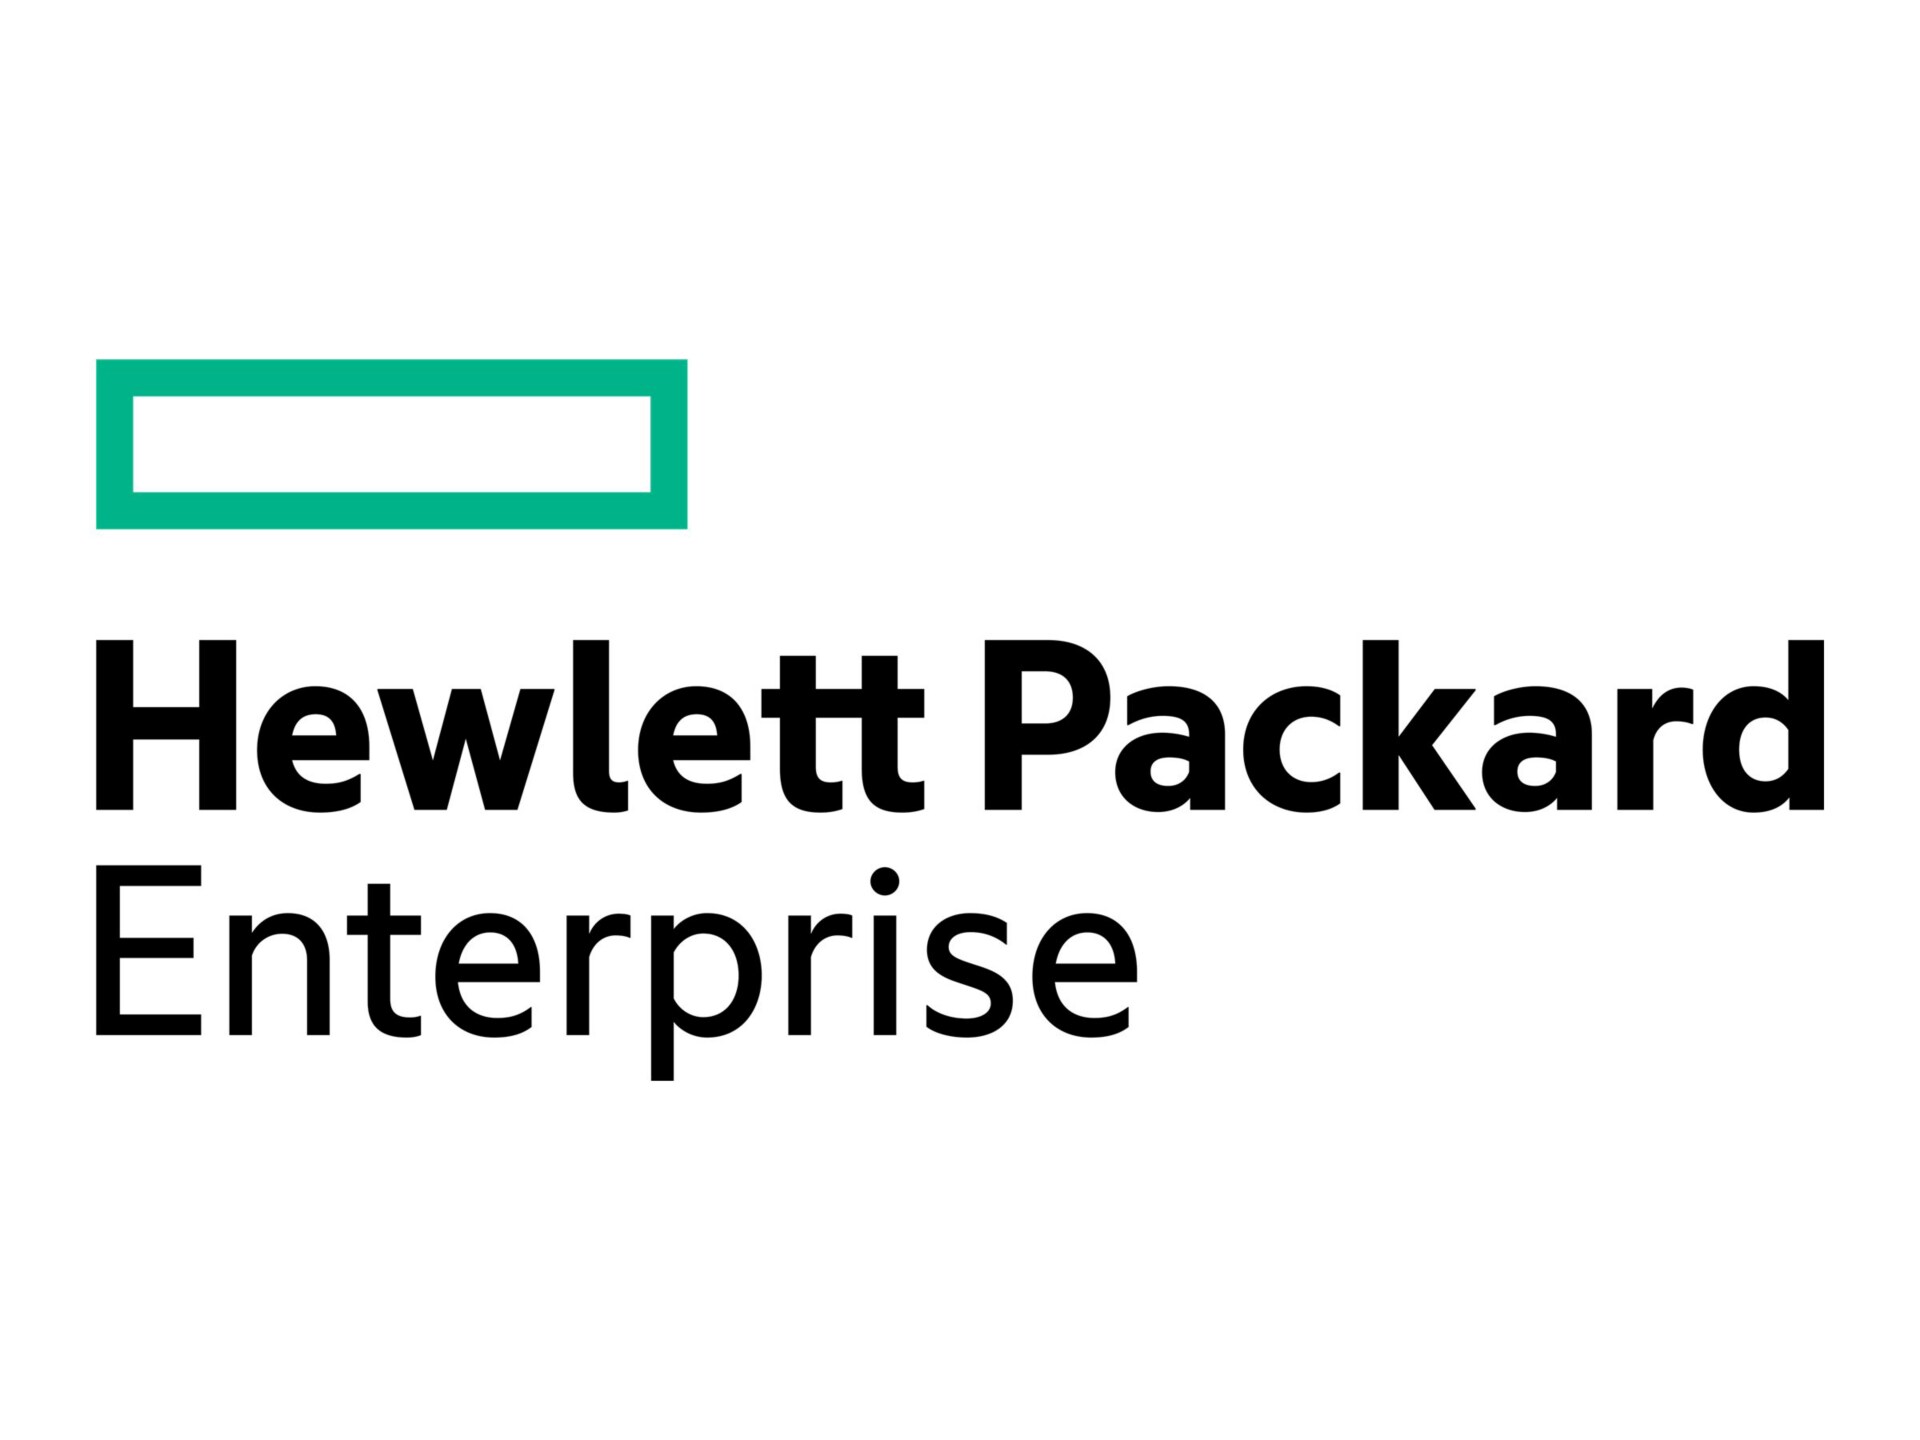 HPE Proactive Care 24x7 Software Service - technical support - for HPE 3PAR 8200 Replication Software Suite - 5 years